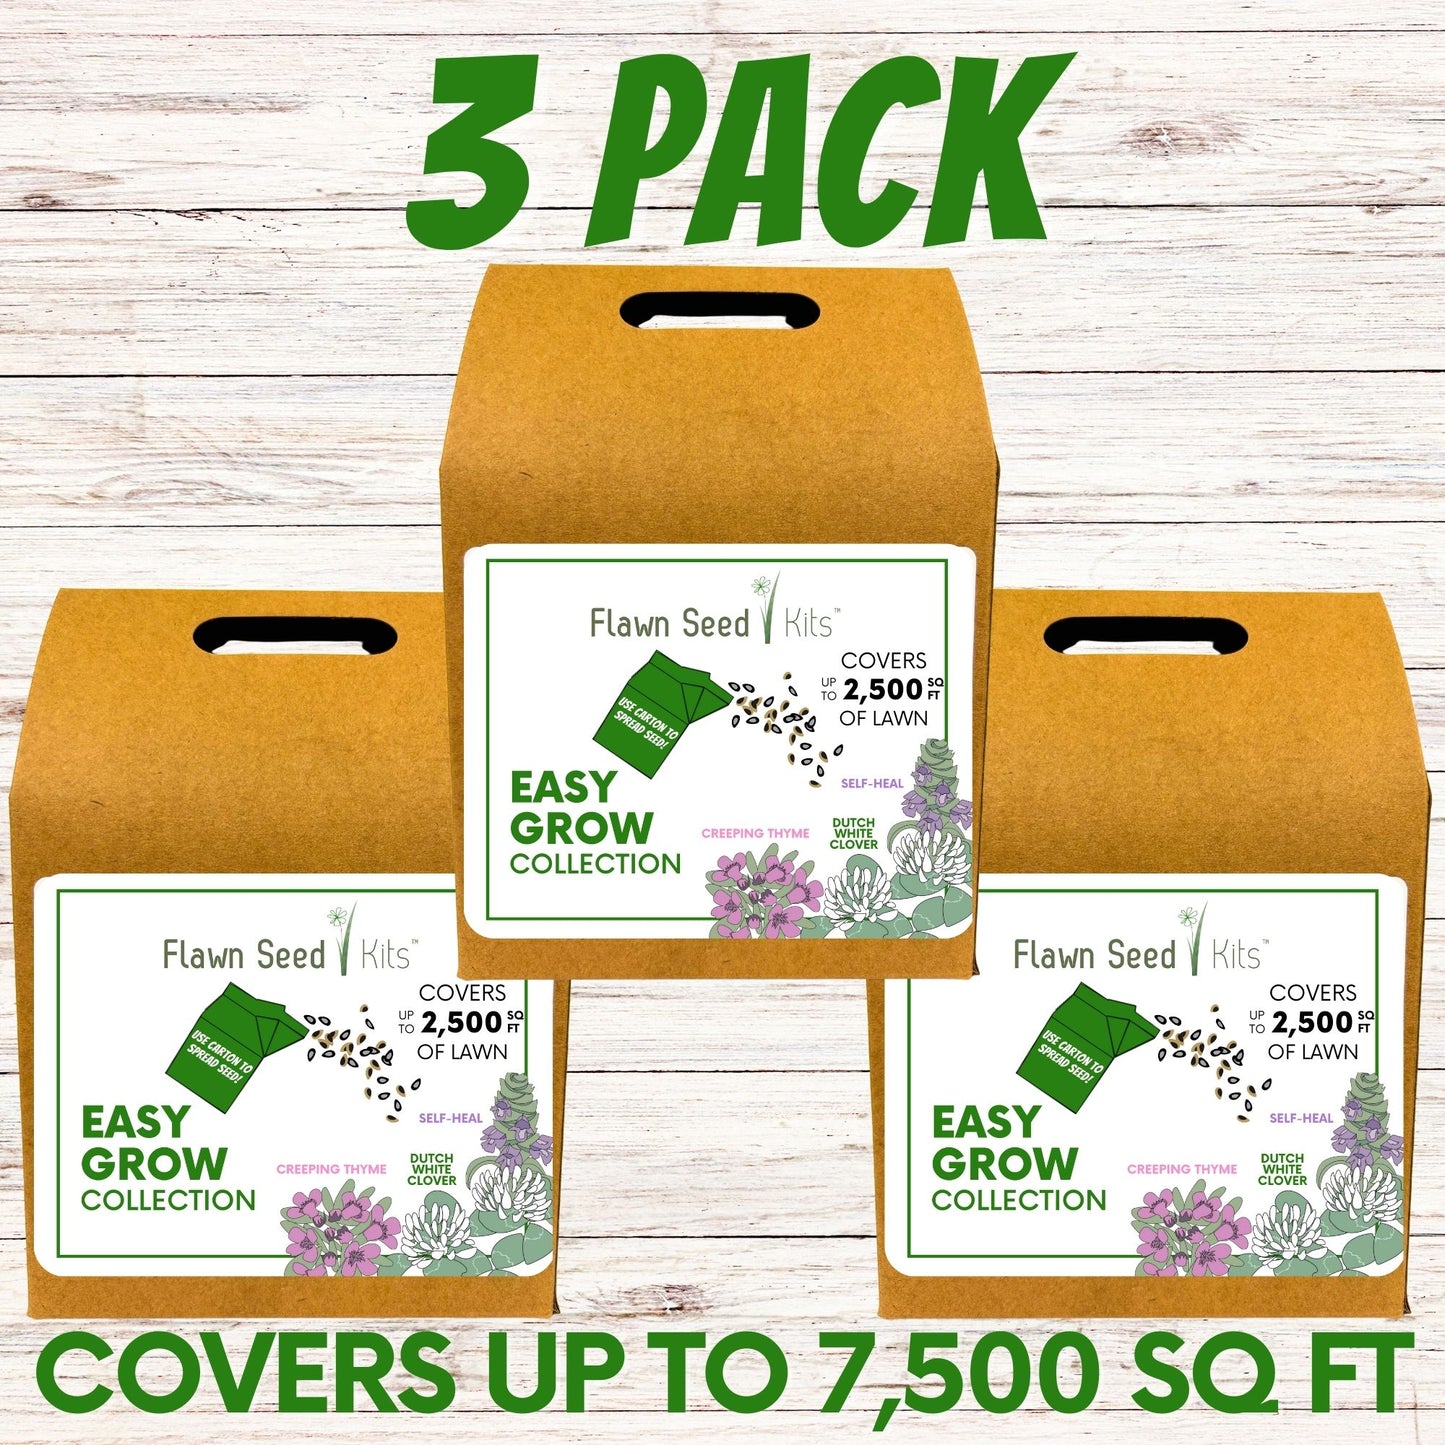 Bee Lawn Flowering Pollinator Seed Kit, Dutch White Clover, Self-Heal, Creeping Thyme, Easy Spread Container 3 Pack Covers 7,500 square feet